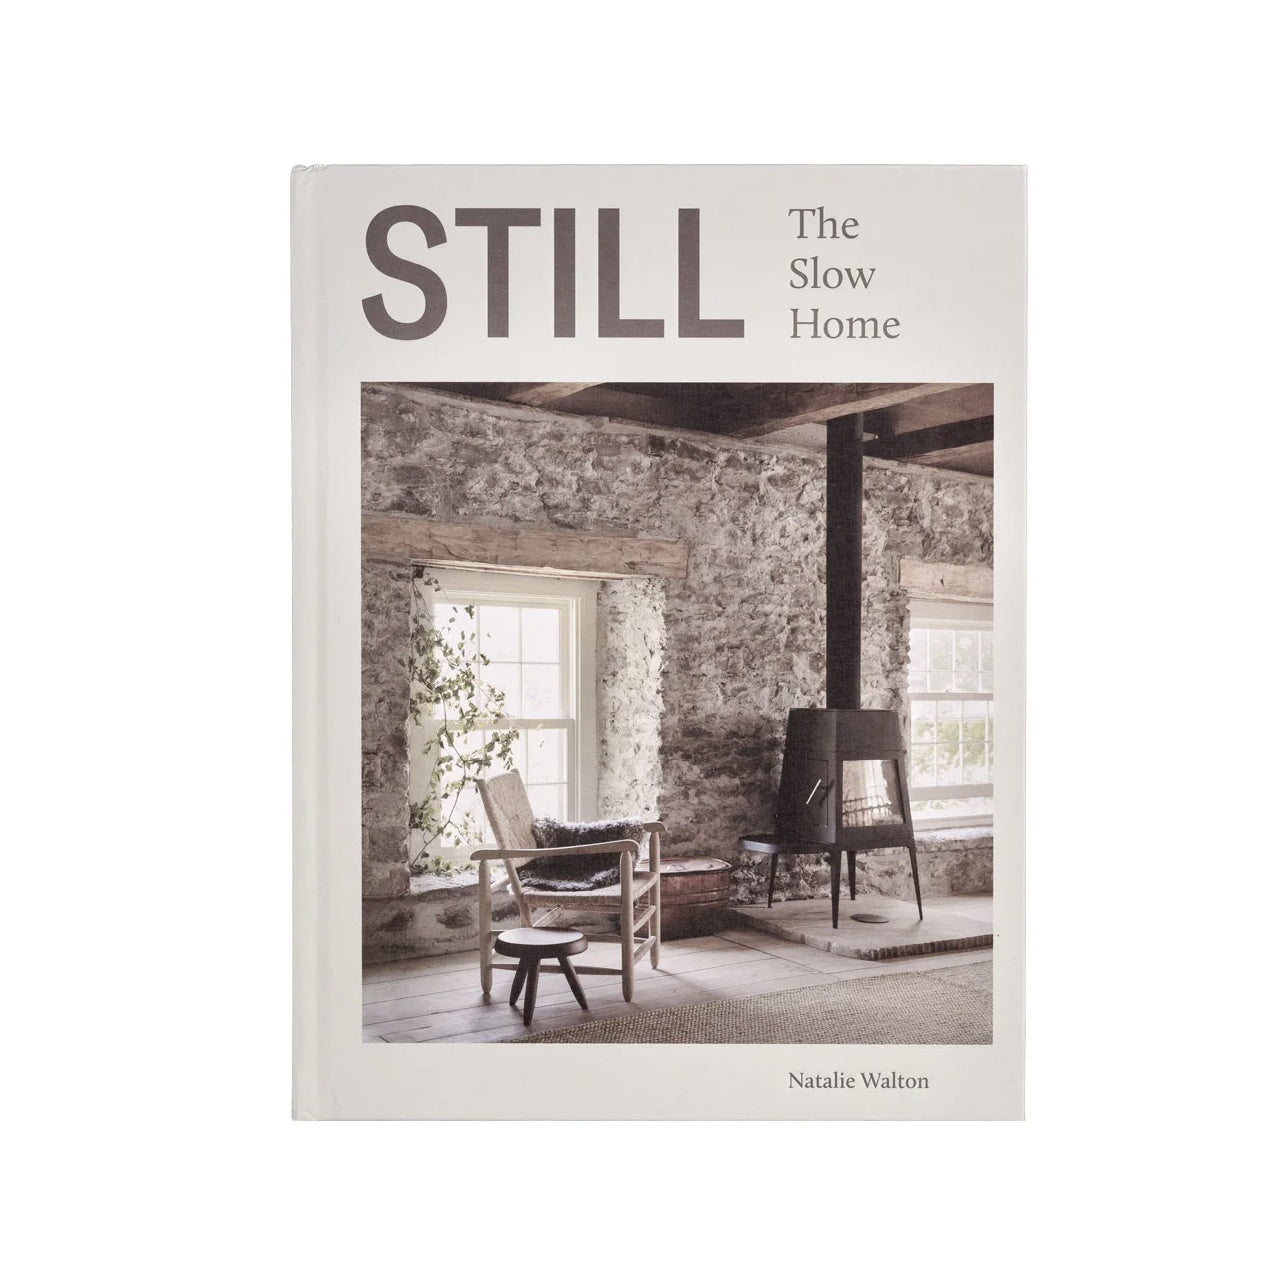 STILL - THE SLOW HOME